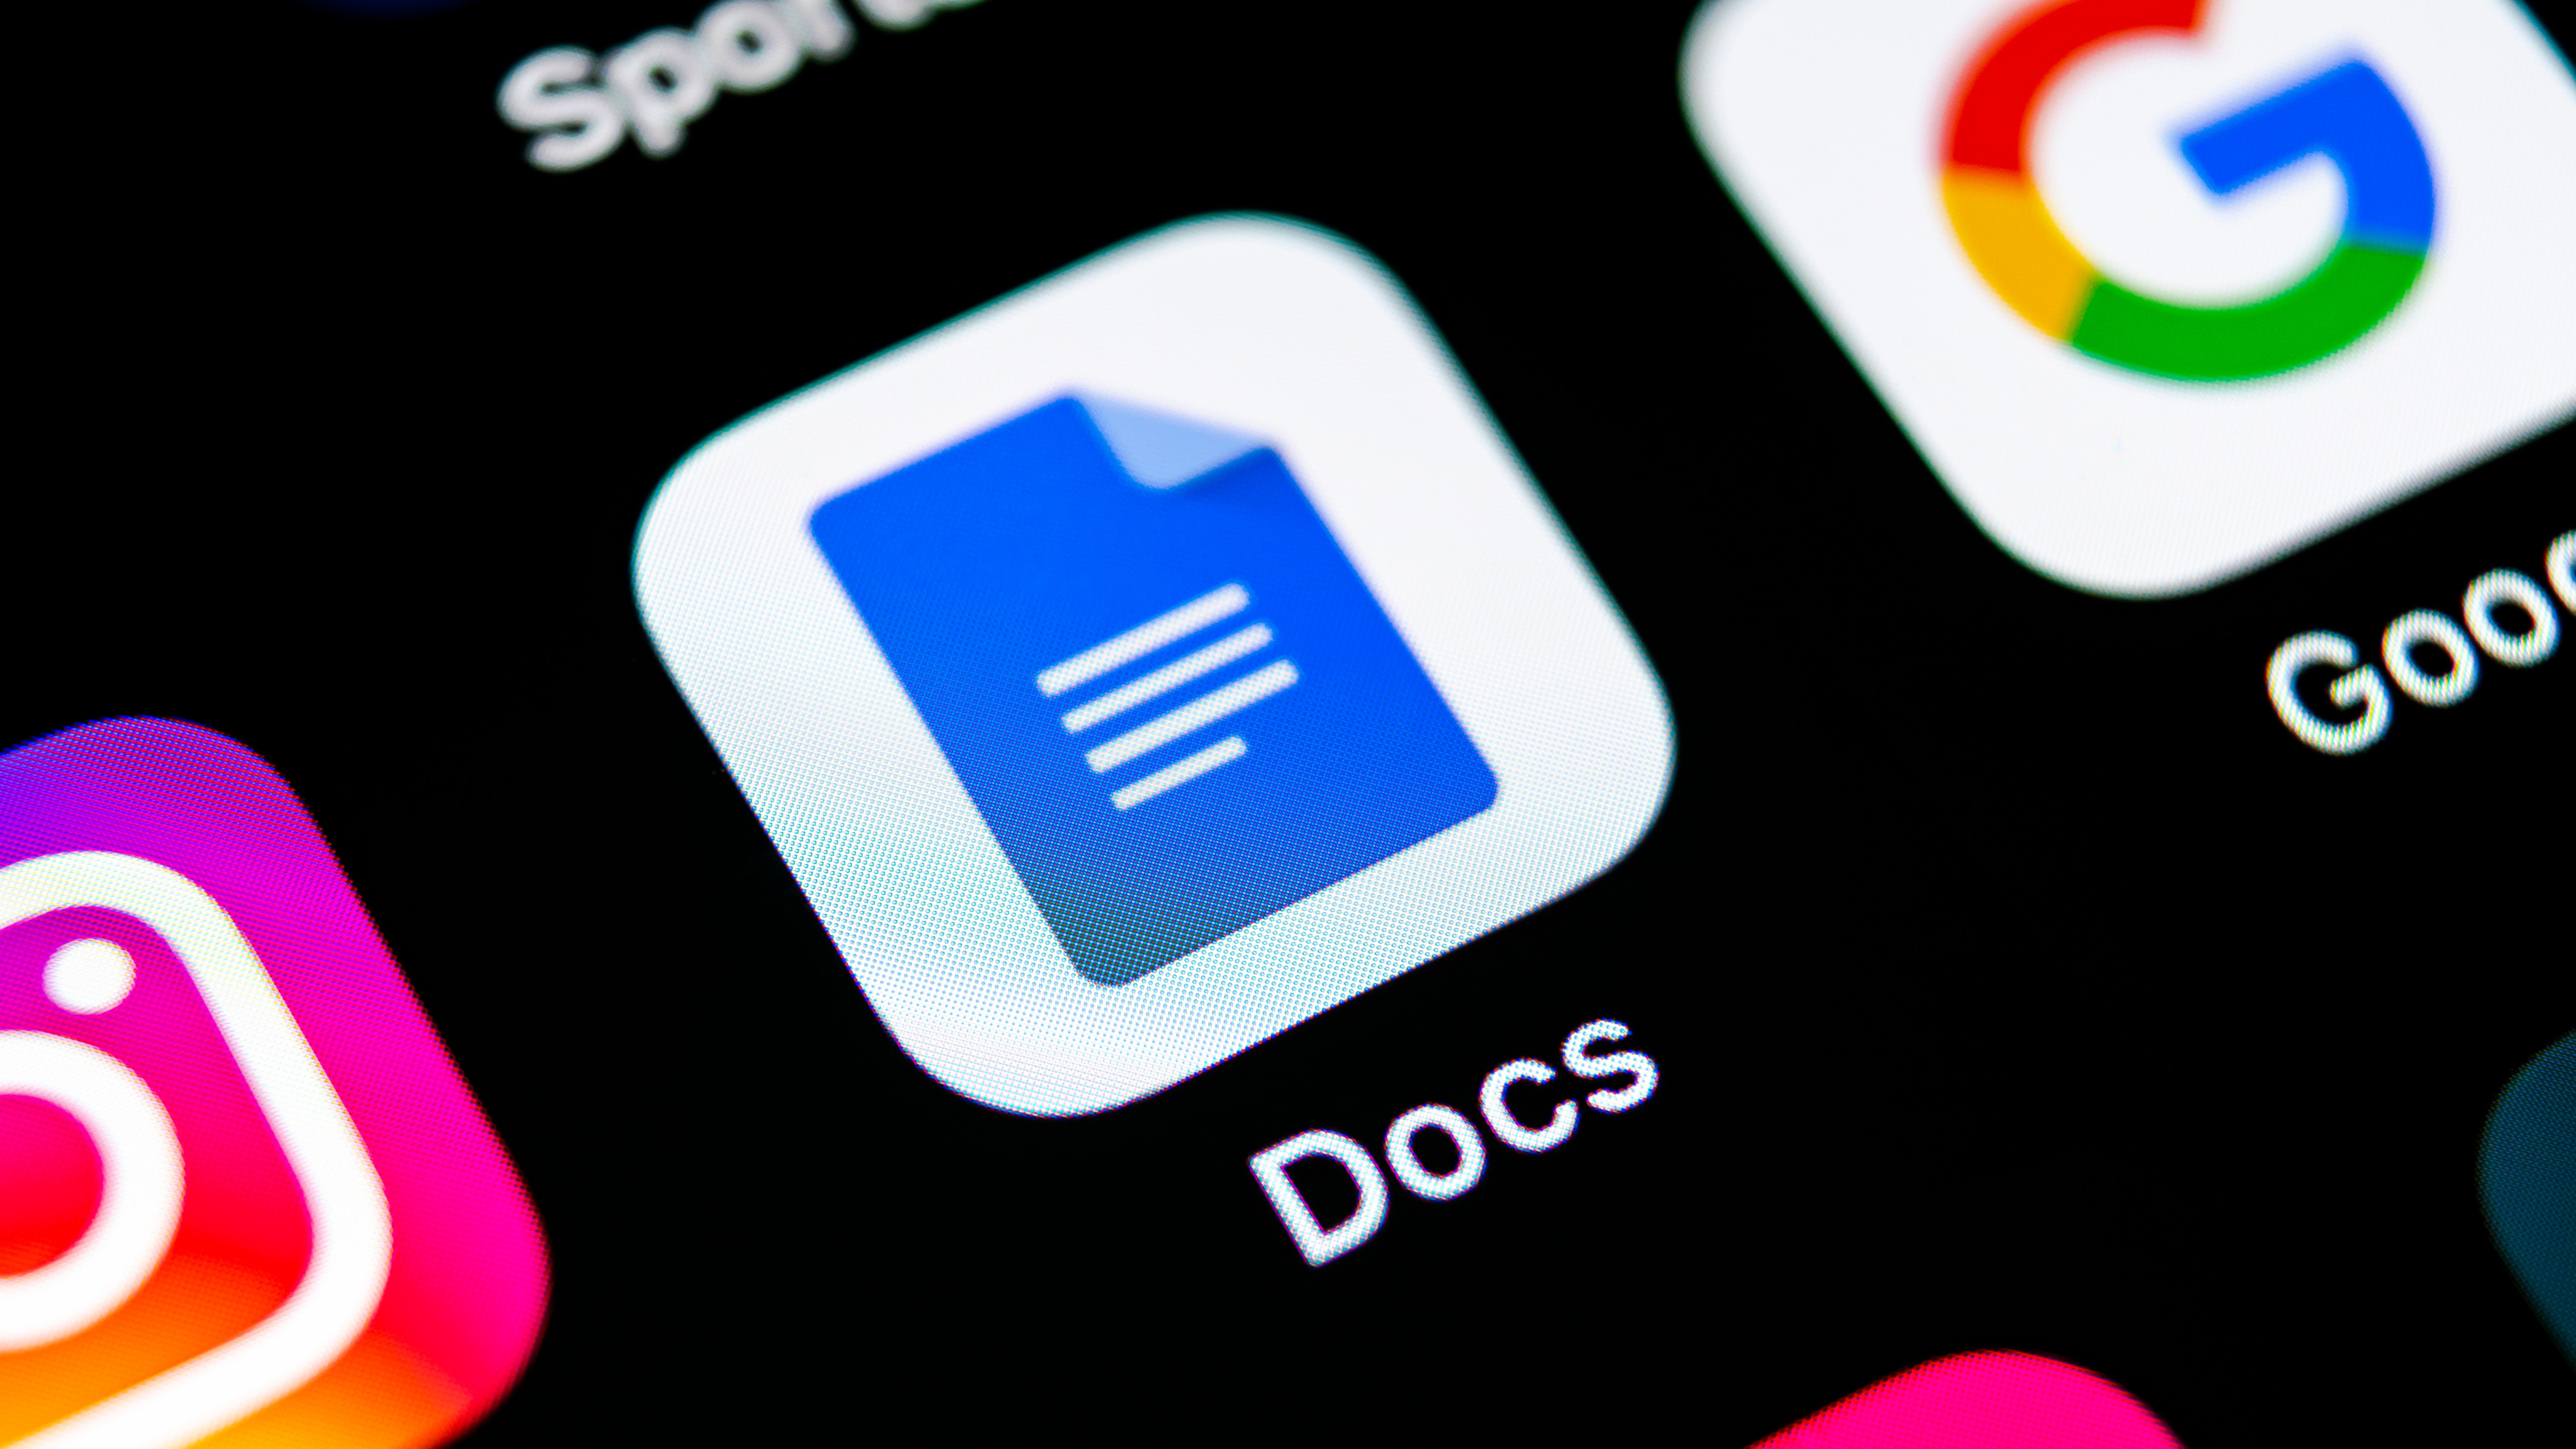 New update for Google Docs, Sheets, and Slides will make comments much easier to use